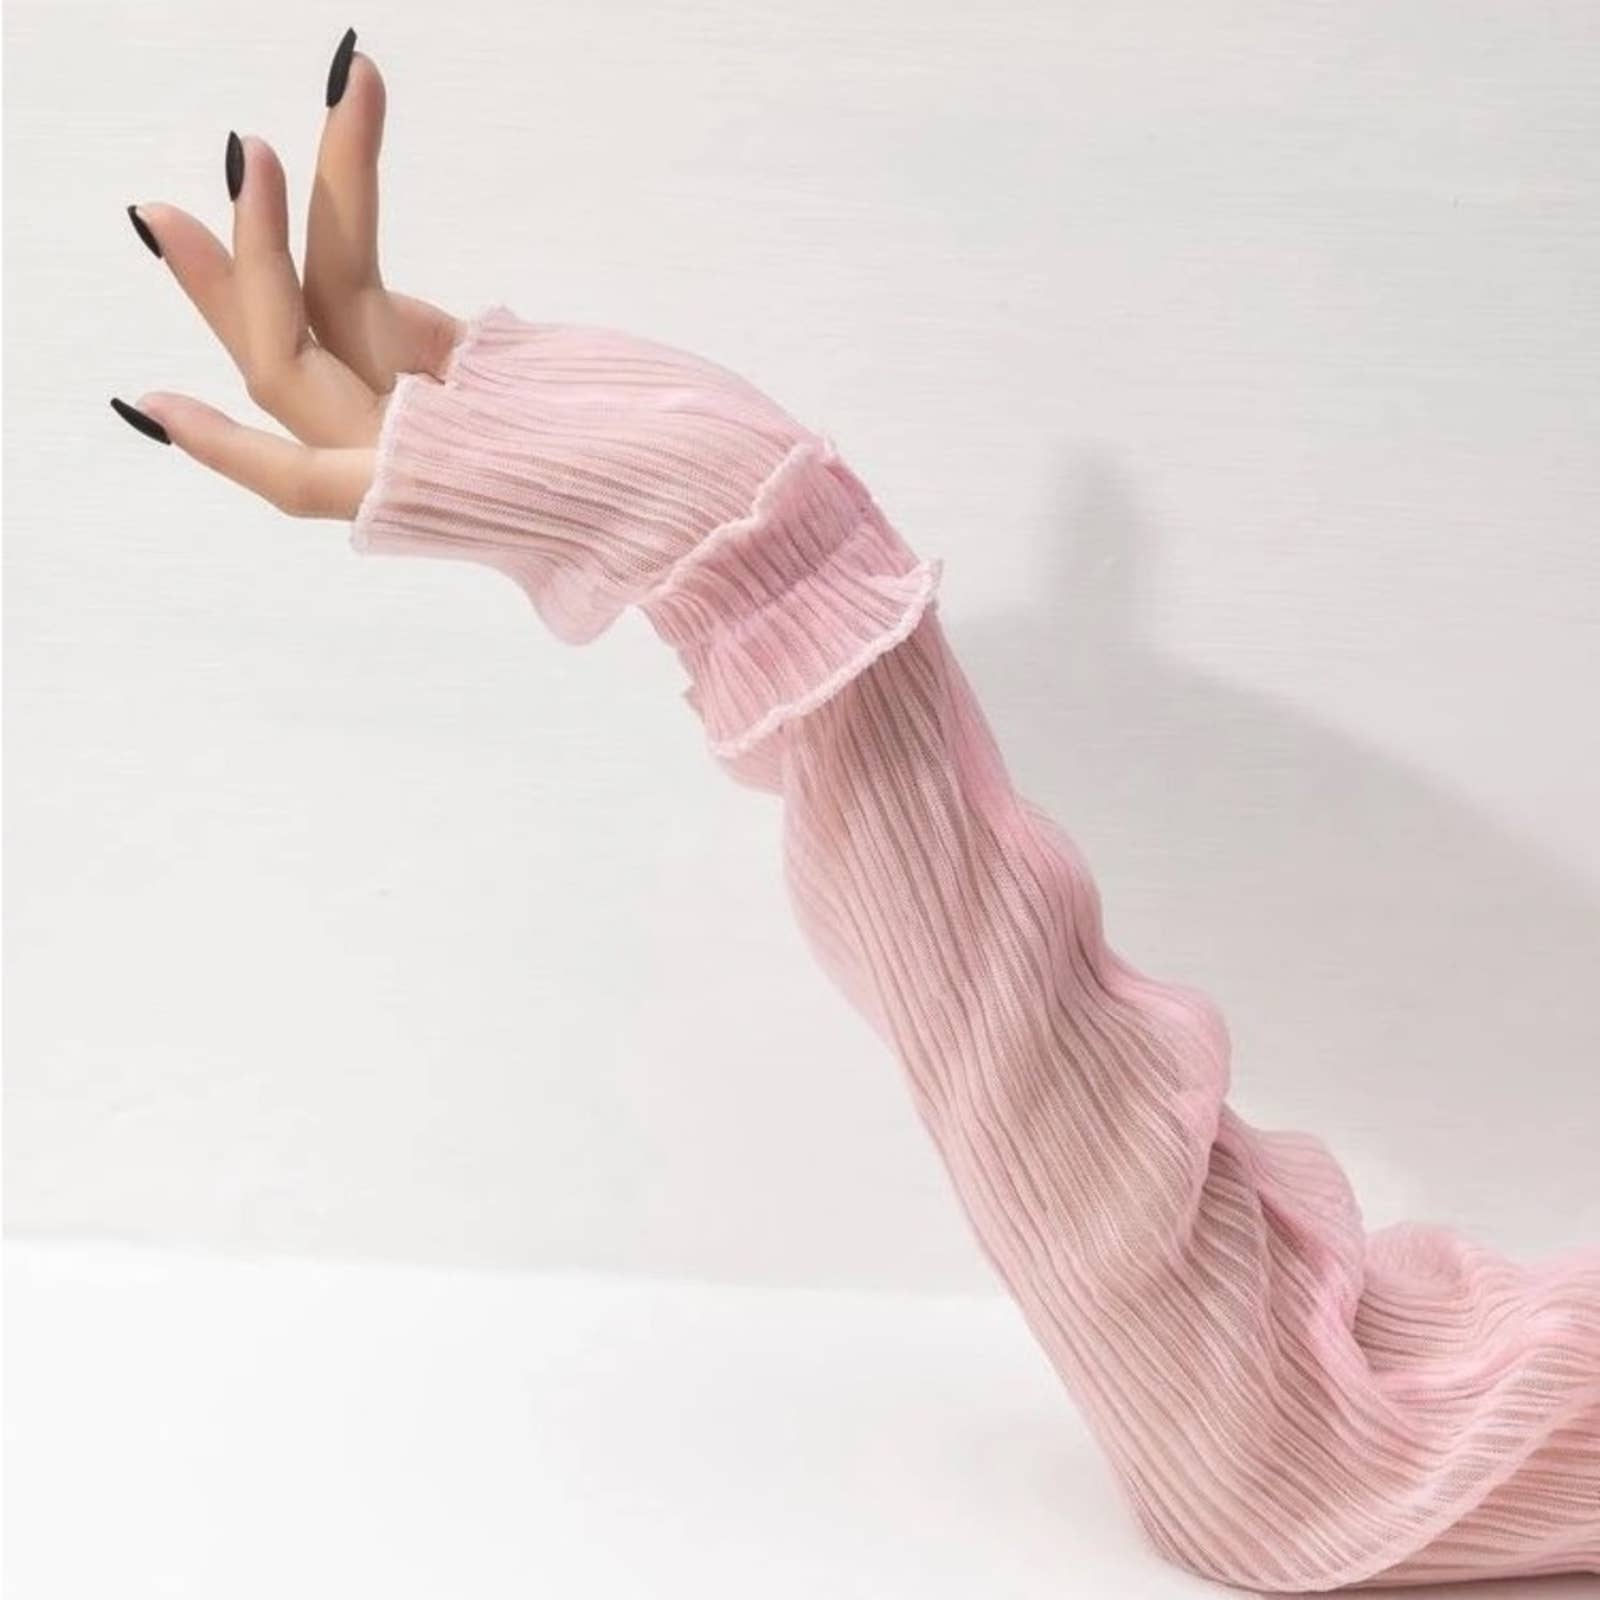 Pink Sheer Ruched Look Pull Up Arm Sleeves Glove - Passion of Essence Boutique